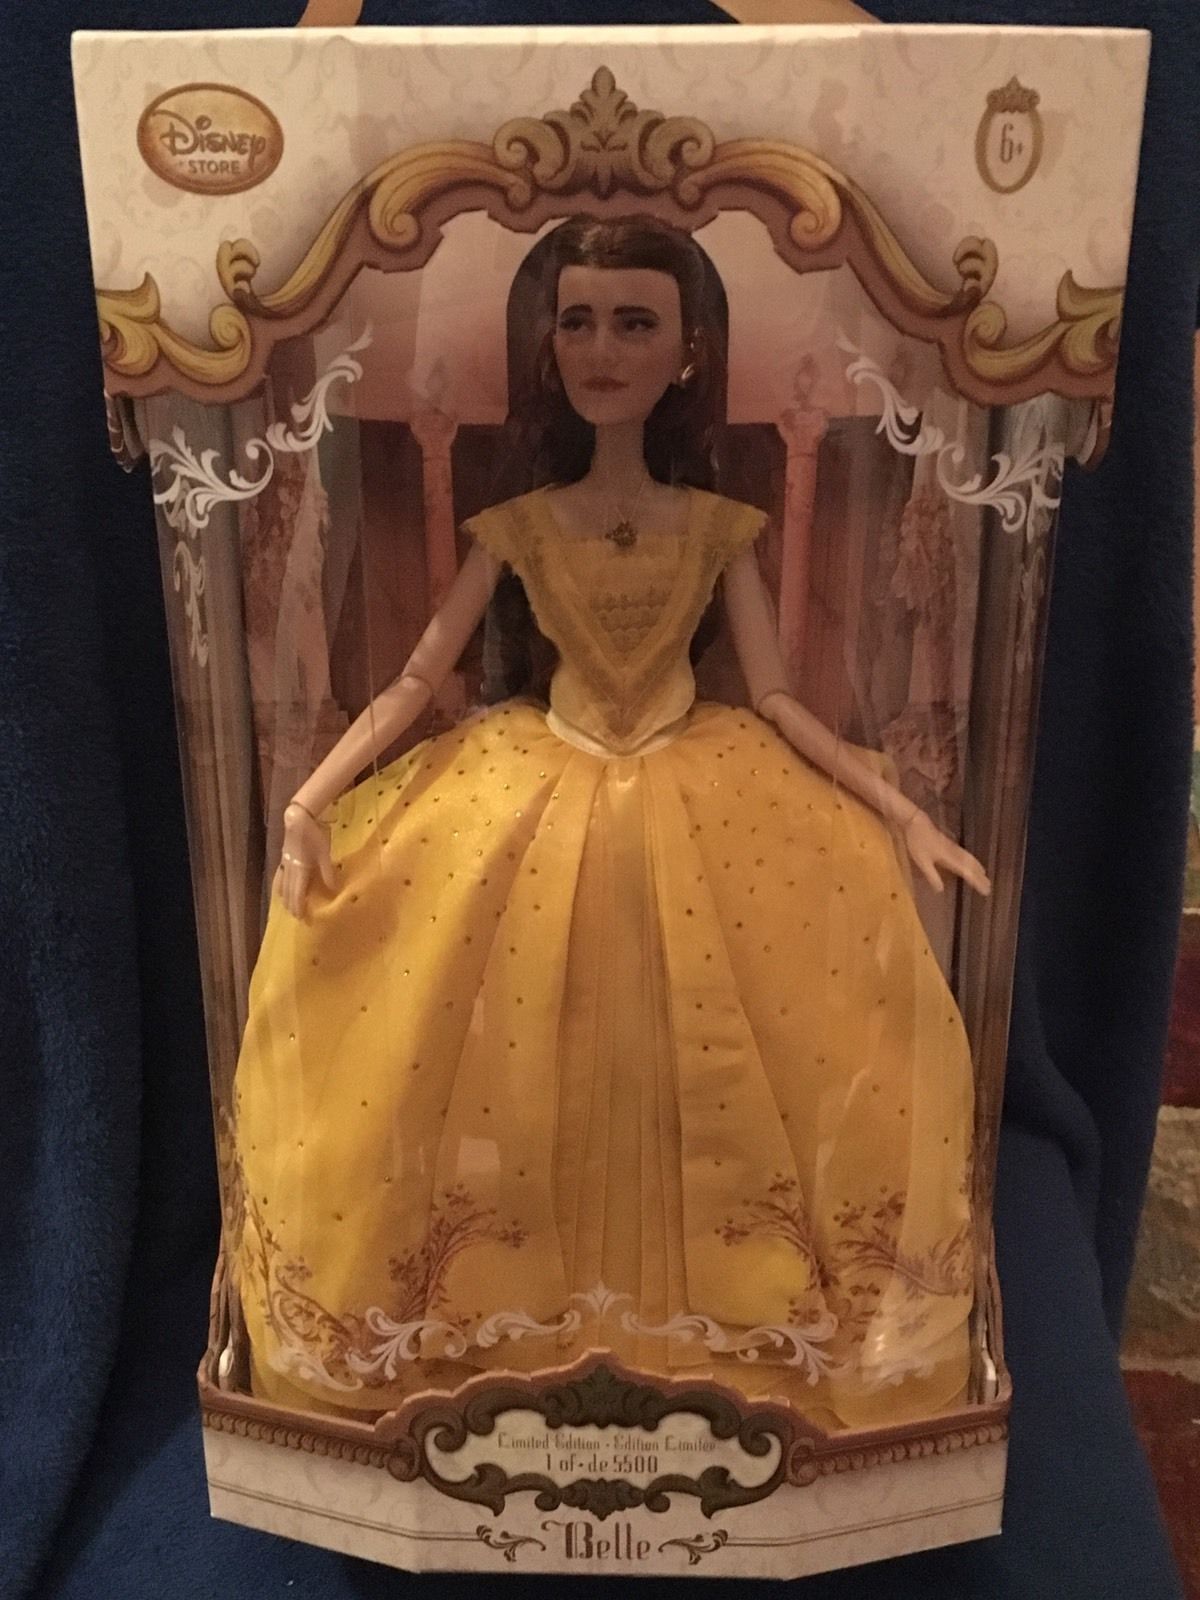 Disney Belle Limited Edition Doll Live Action Film 17'' Beauty and the Beast NEW